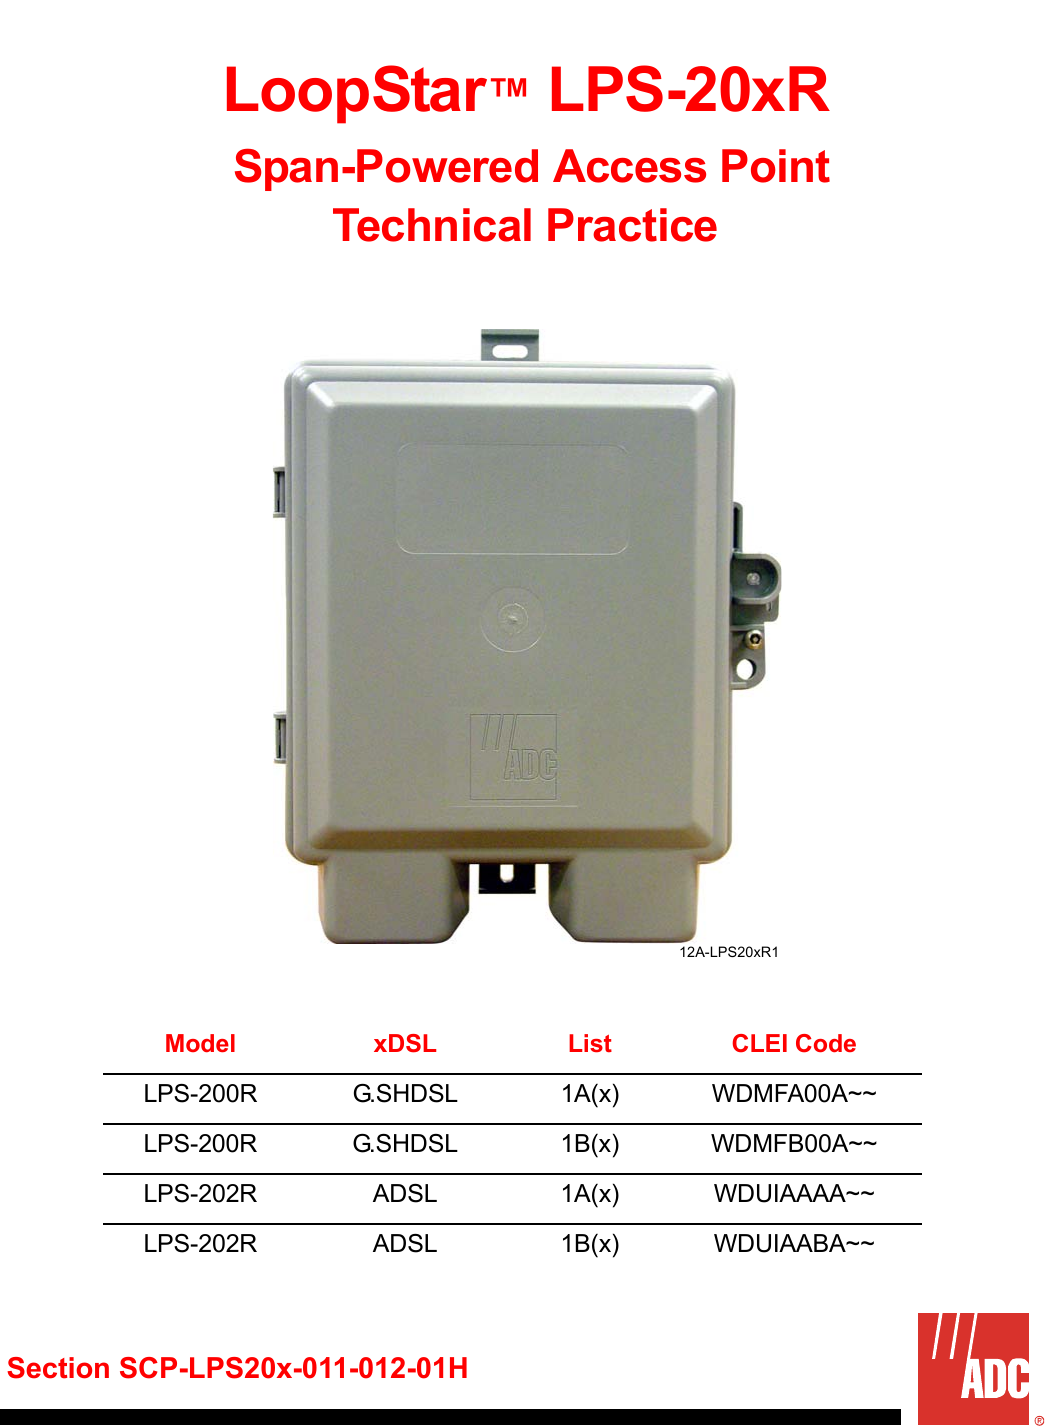 Section SCP-LPS20x-011-012-01HLoopStar™ LPS-20xR  Span-Powered Access Point  Technical PracticeModel xDSL List CLEI CodeLPS-200R G.SHDSL 1A(x) WDMFA00A~~LPS-200R G.SHDSL 1B(x) WDMFB00A~~LPS-202R ADSL 1A(x) WDUIAAAA~~LPS-202R ADSL 1B(x) WDUIAABA~~12A-LPS20xR1